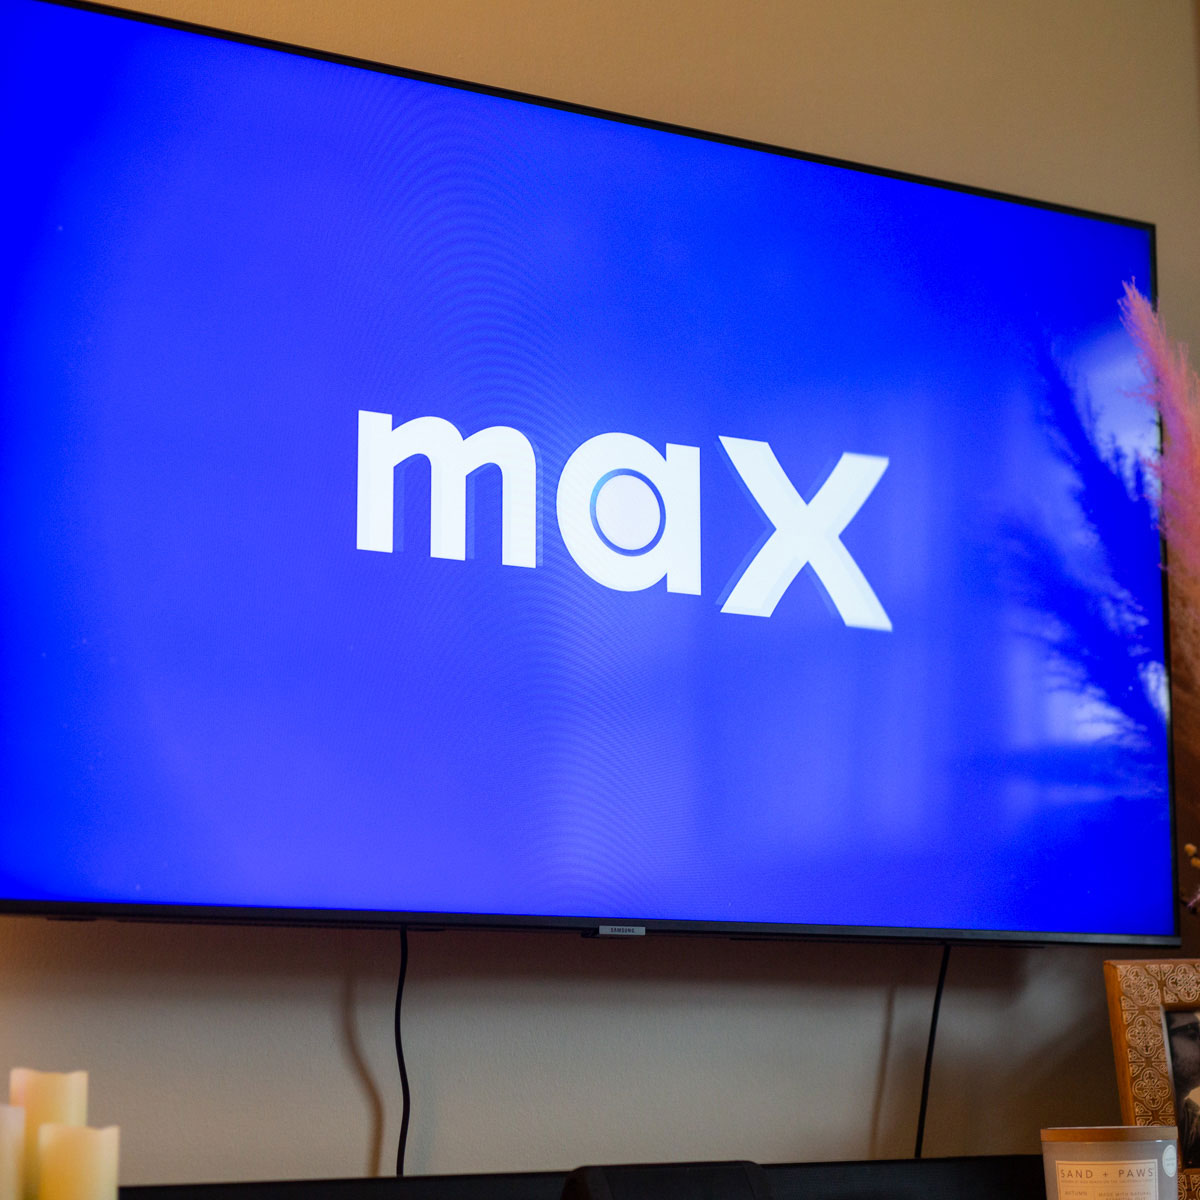 40 Best Shows on HBO Max - TV Series to Watch on HBO Max in 2023